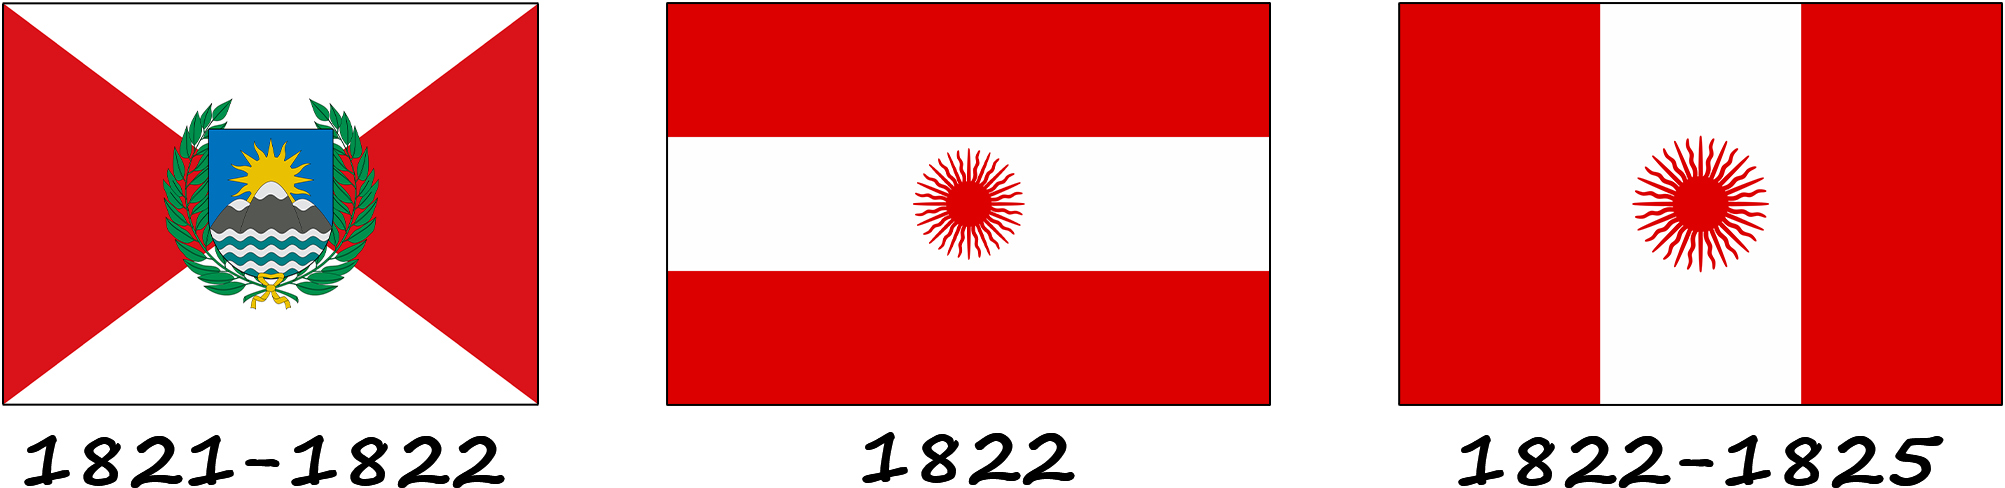 History of the Peruvian flag